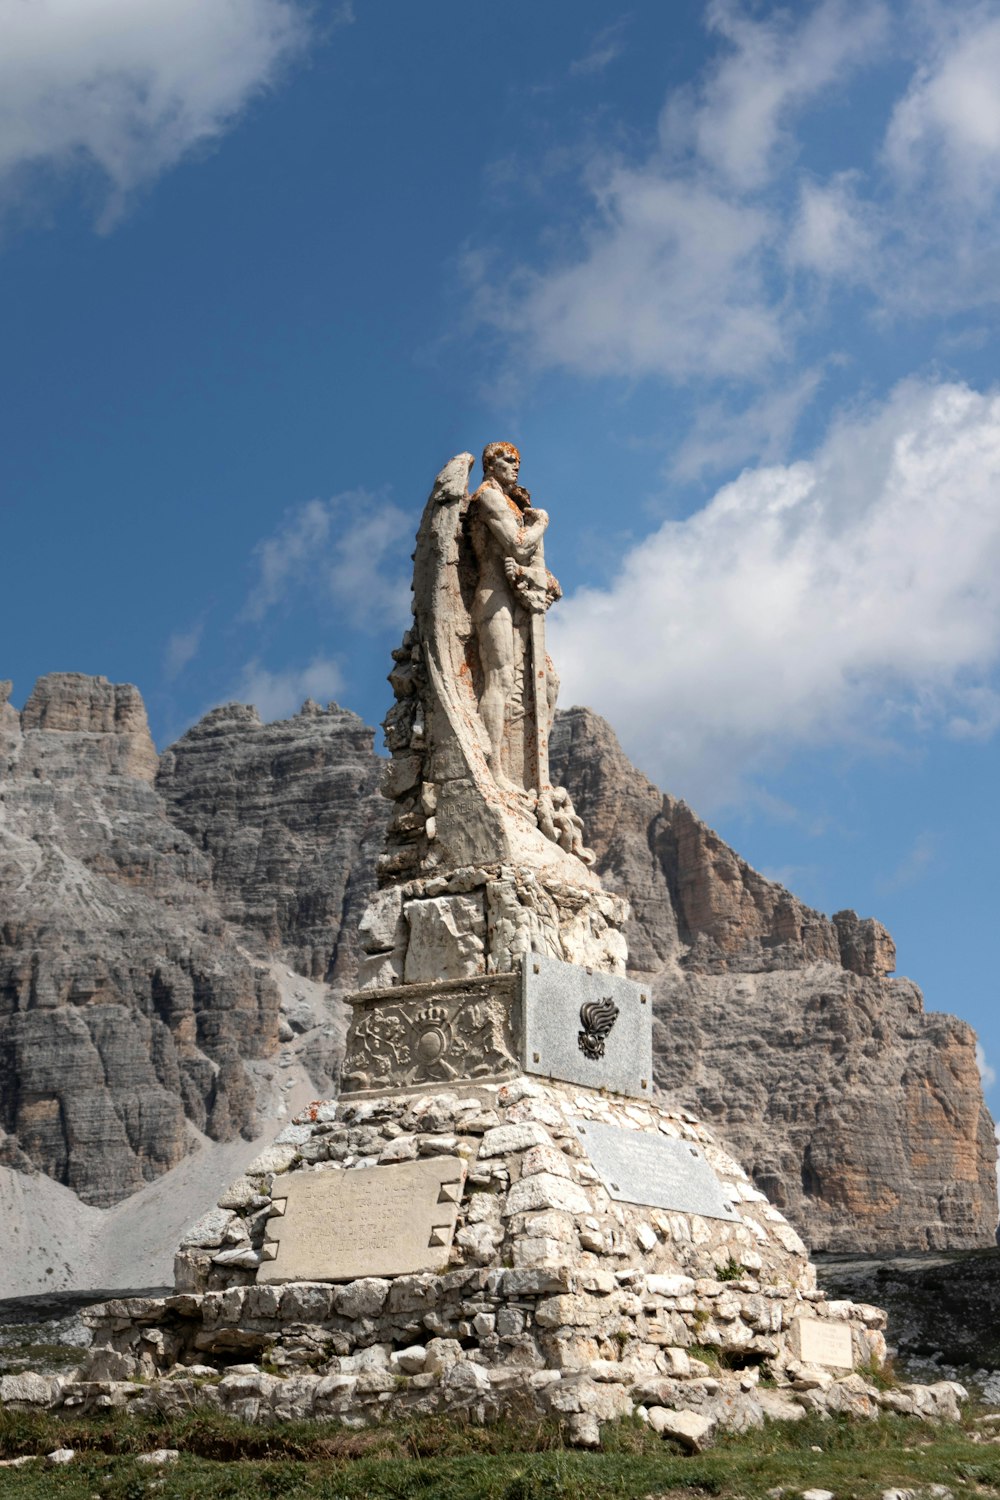 a statue of a man standing on top of a mountain